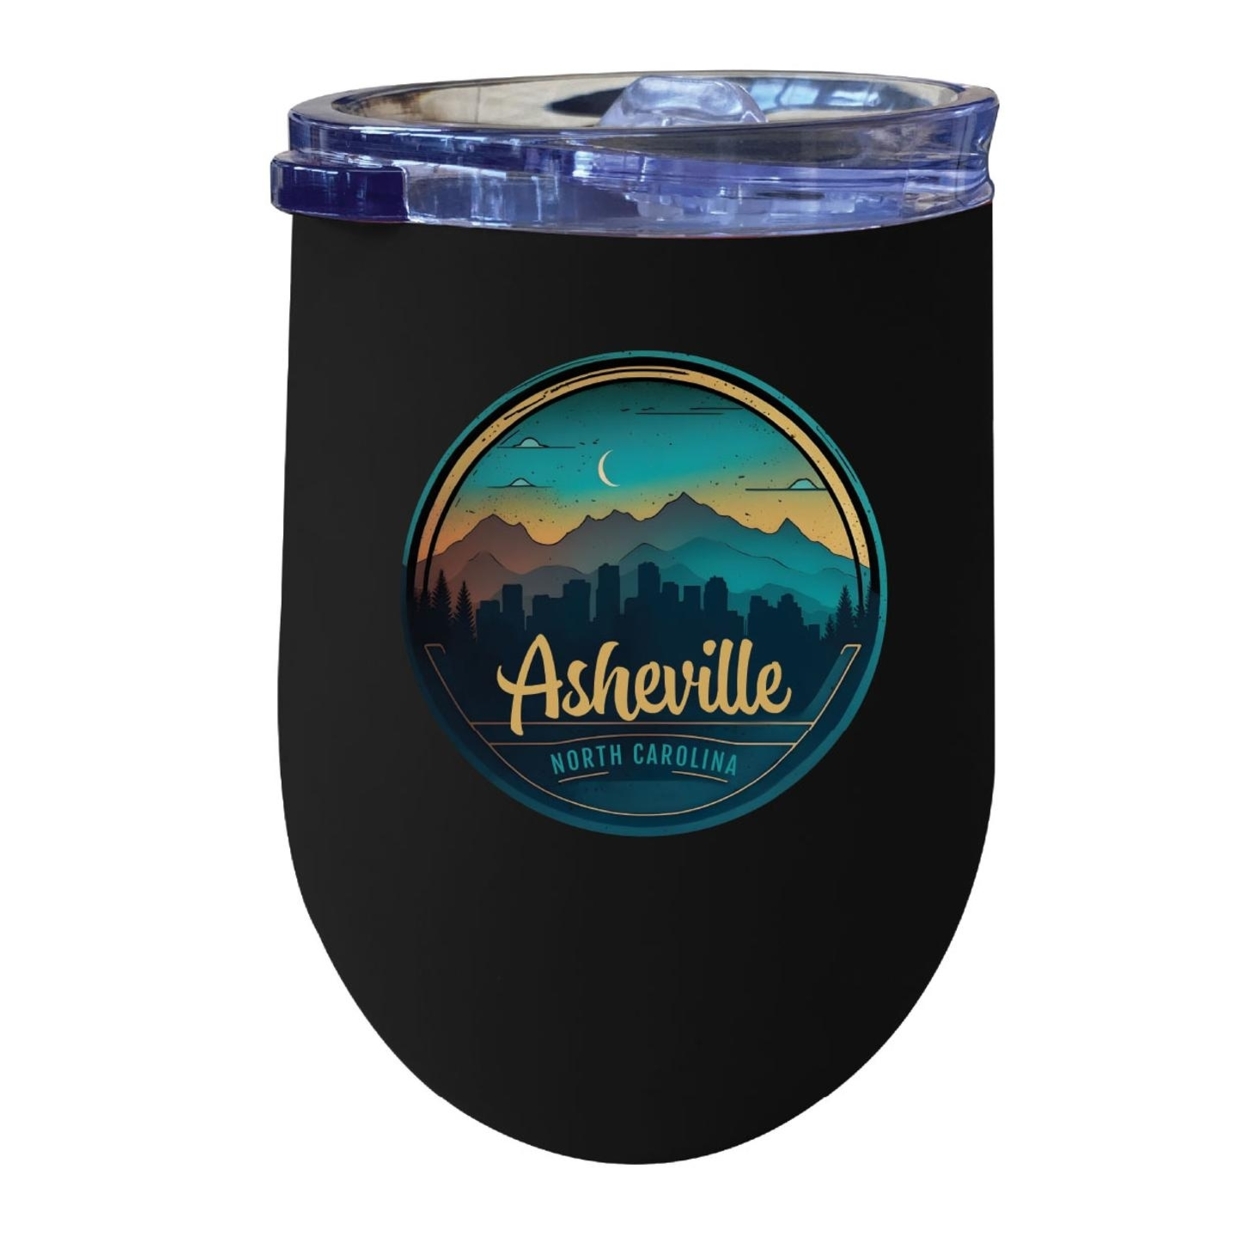 Asheville North Carolina Souvenir 12 Oz Insulated Wine Stainless Steel Tumbler - Coral